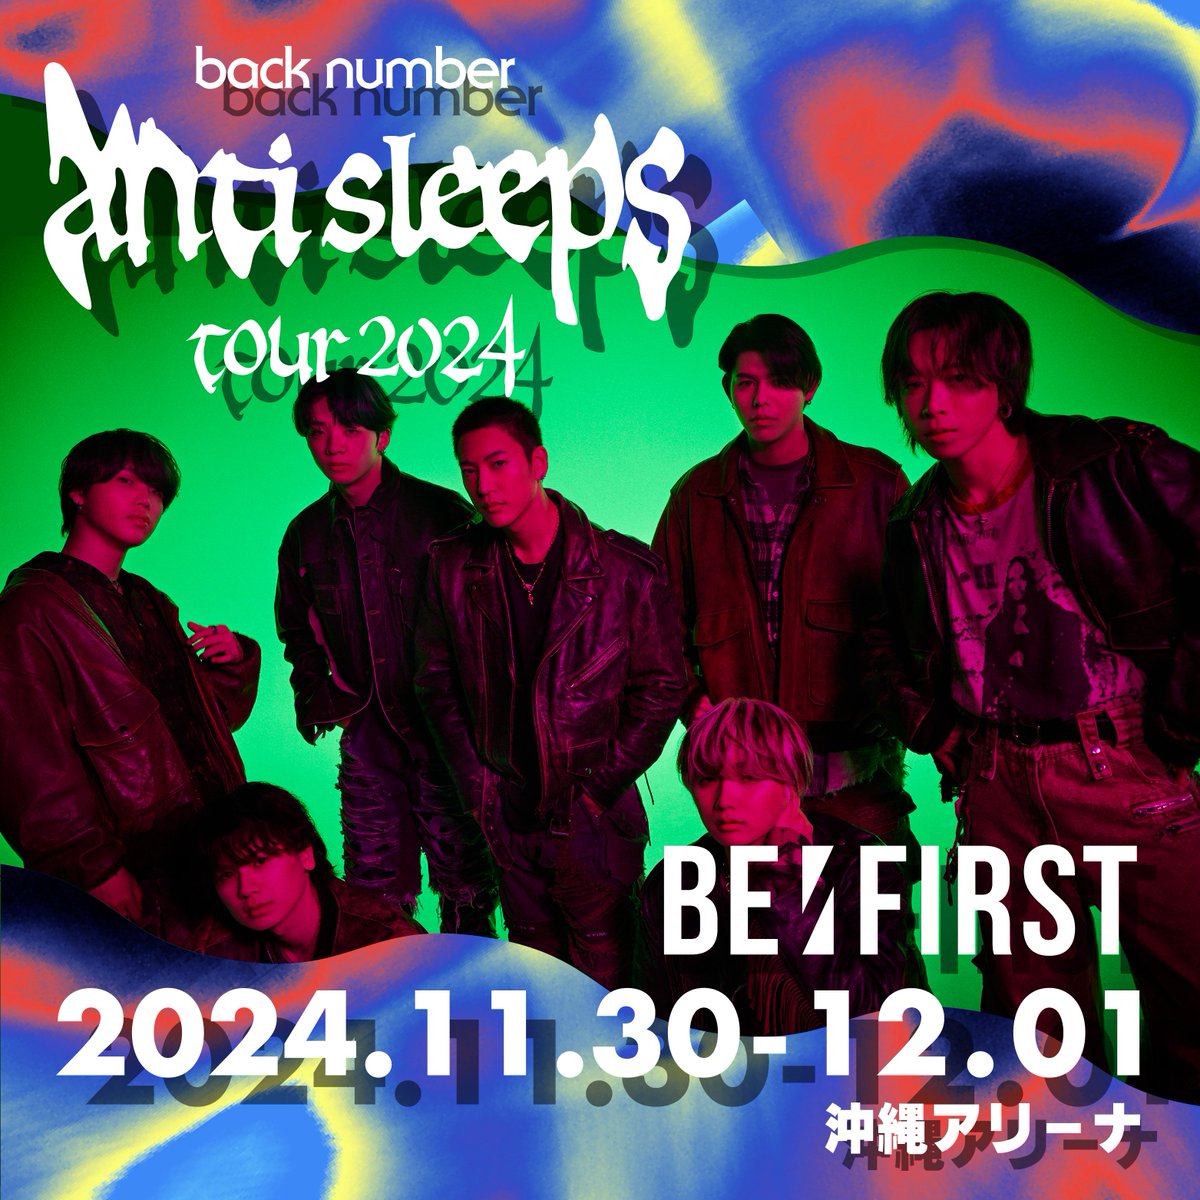 back numberアリーナ対バンツアー
「anti sleeps tour 2024」

11/30(土),12/1(日)
【沖縄】沖縄アリーナ 公演

BE:FIRST 出演決定

🔗backnumber.info/tour2024

#backnumber
#backnumber対バンツアー
@backnumberstaff

#BEFIRST